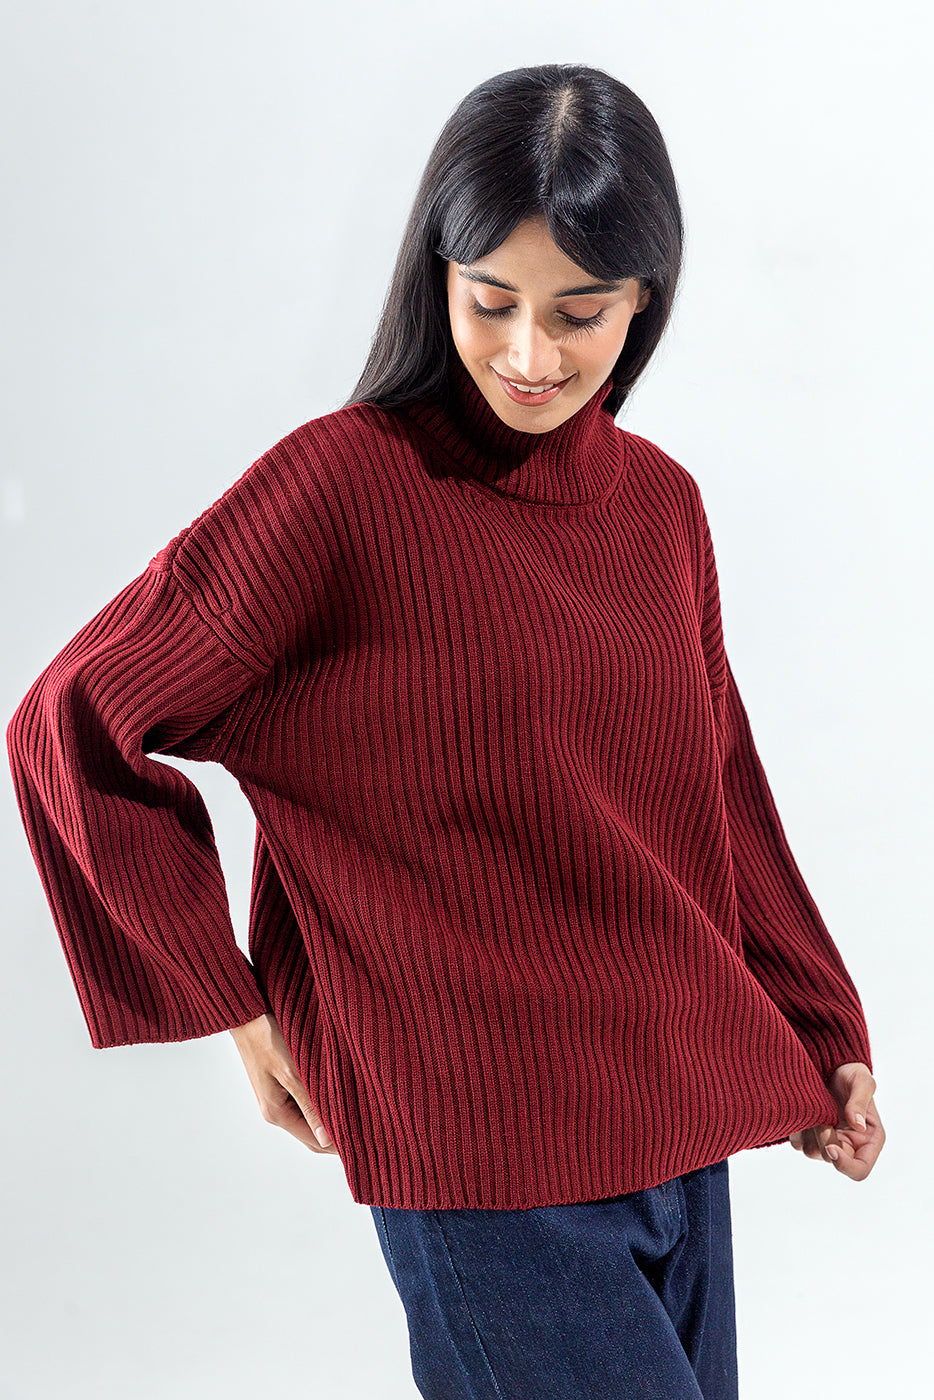 Ribbed Turtle Neck Sweater - BEECHTREE